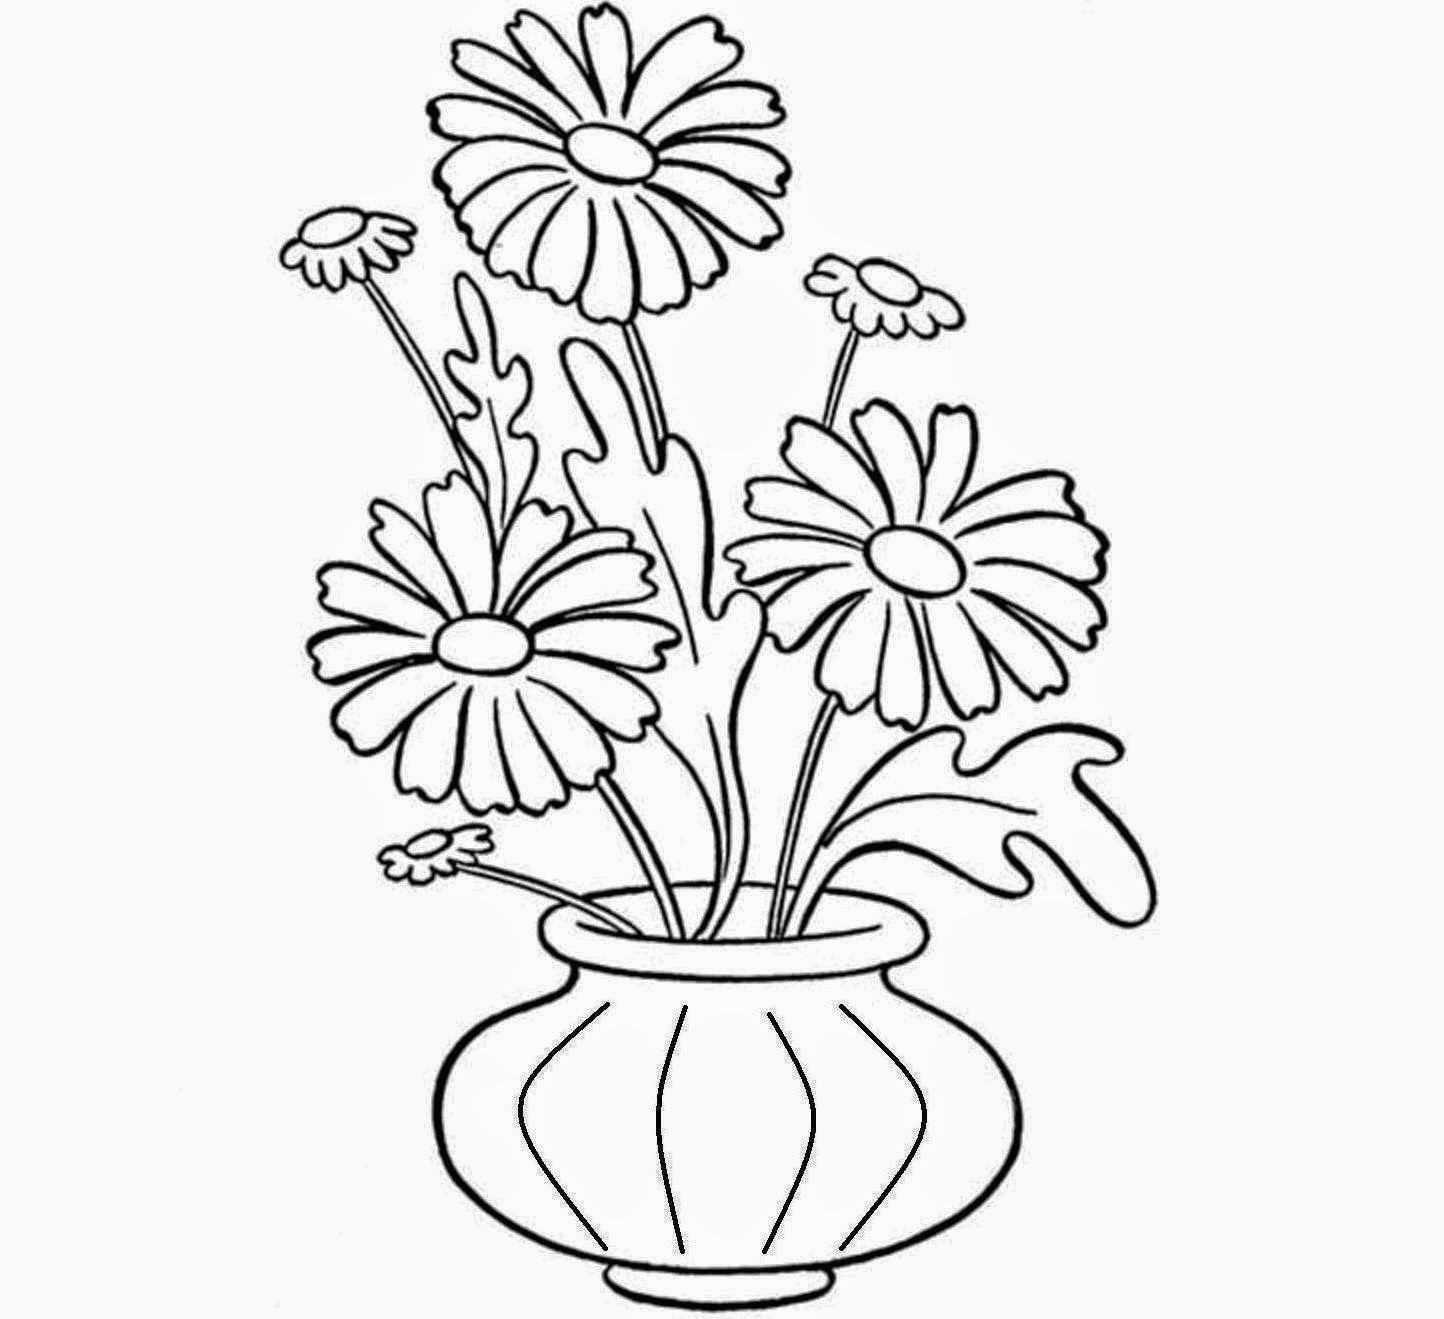 Drawing Flowers Tips Mind Blowing Tips Vases Vintage Glass Vases Garden Center Pieces